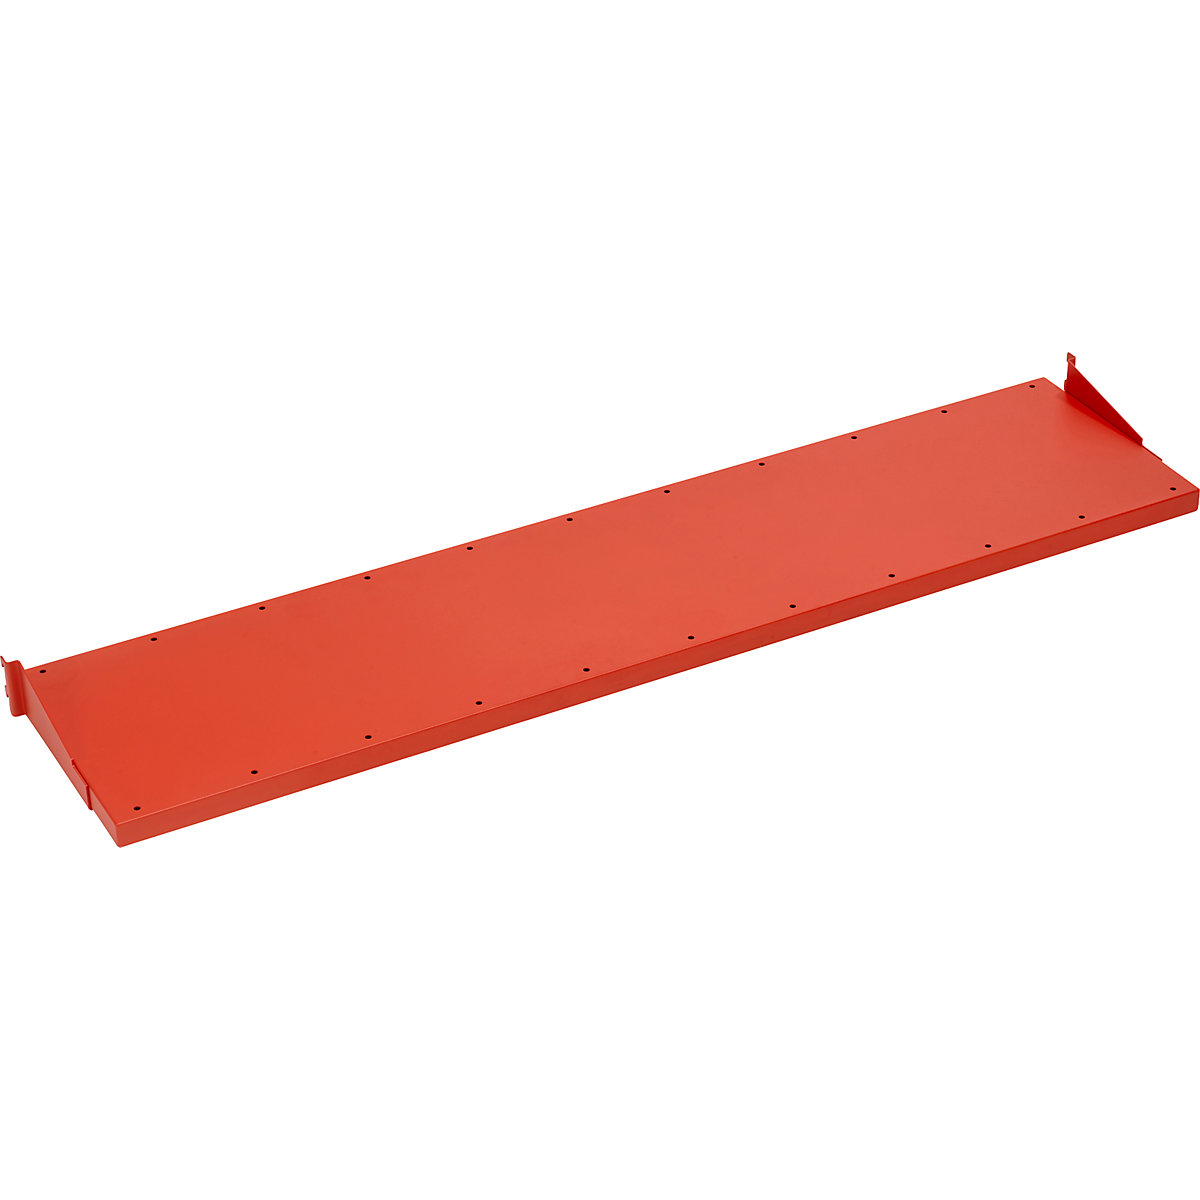 Cardboard box shelf, for securing to add-on rails, for table width 1800 mm, 8 shelf dividers-5